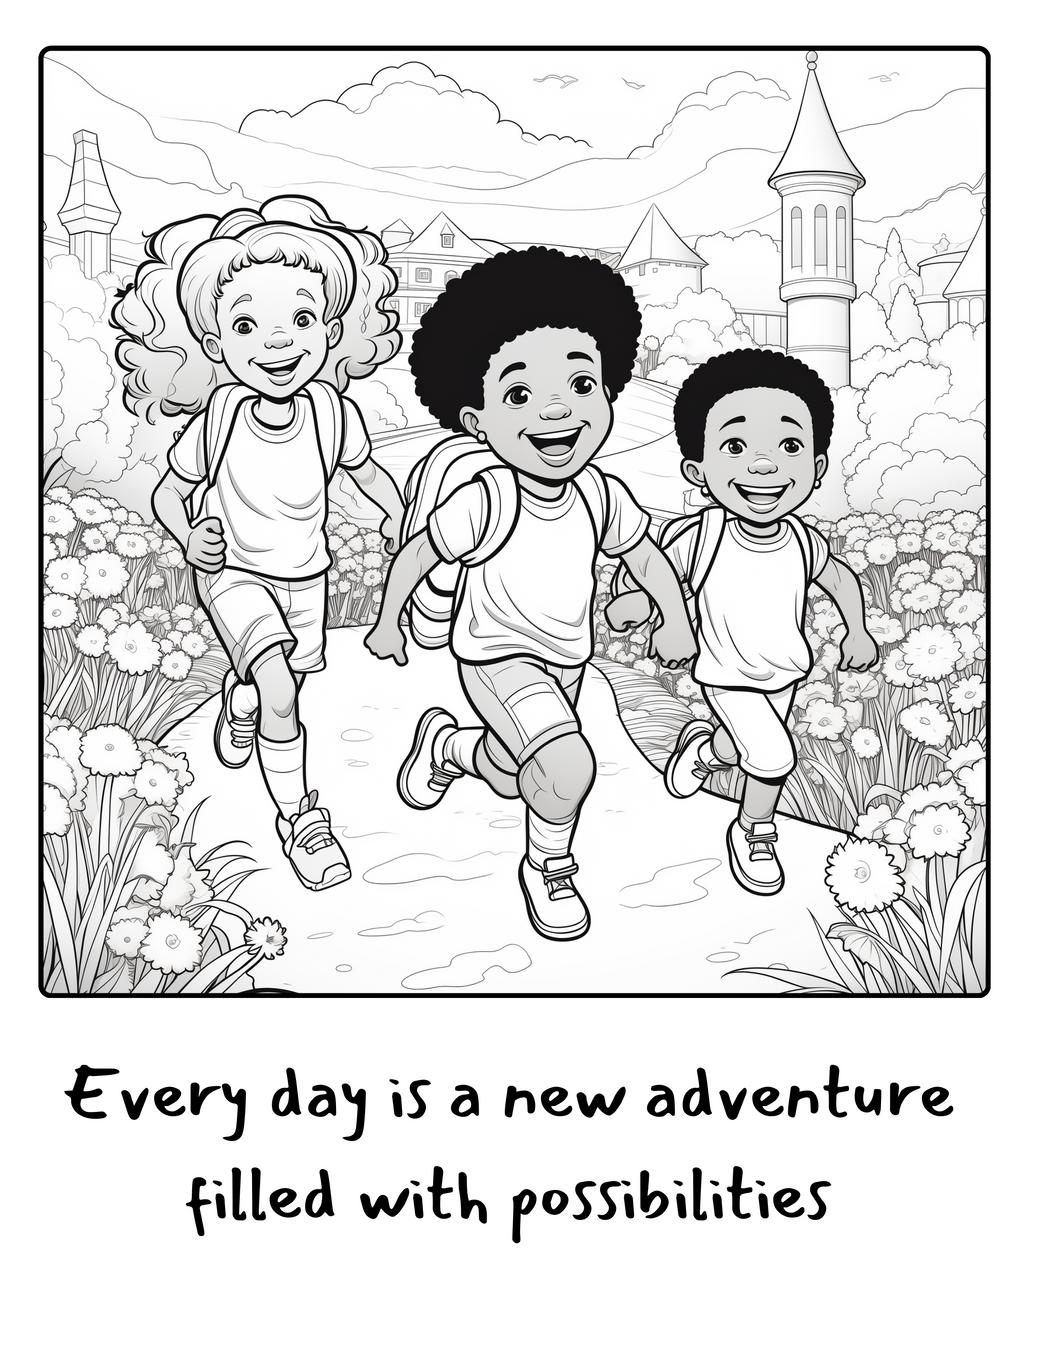 Affirmation Coloring Page for Kids - Technically Tahquetta Designs